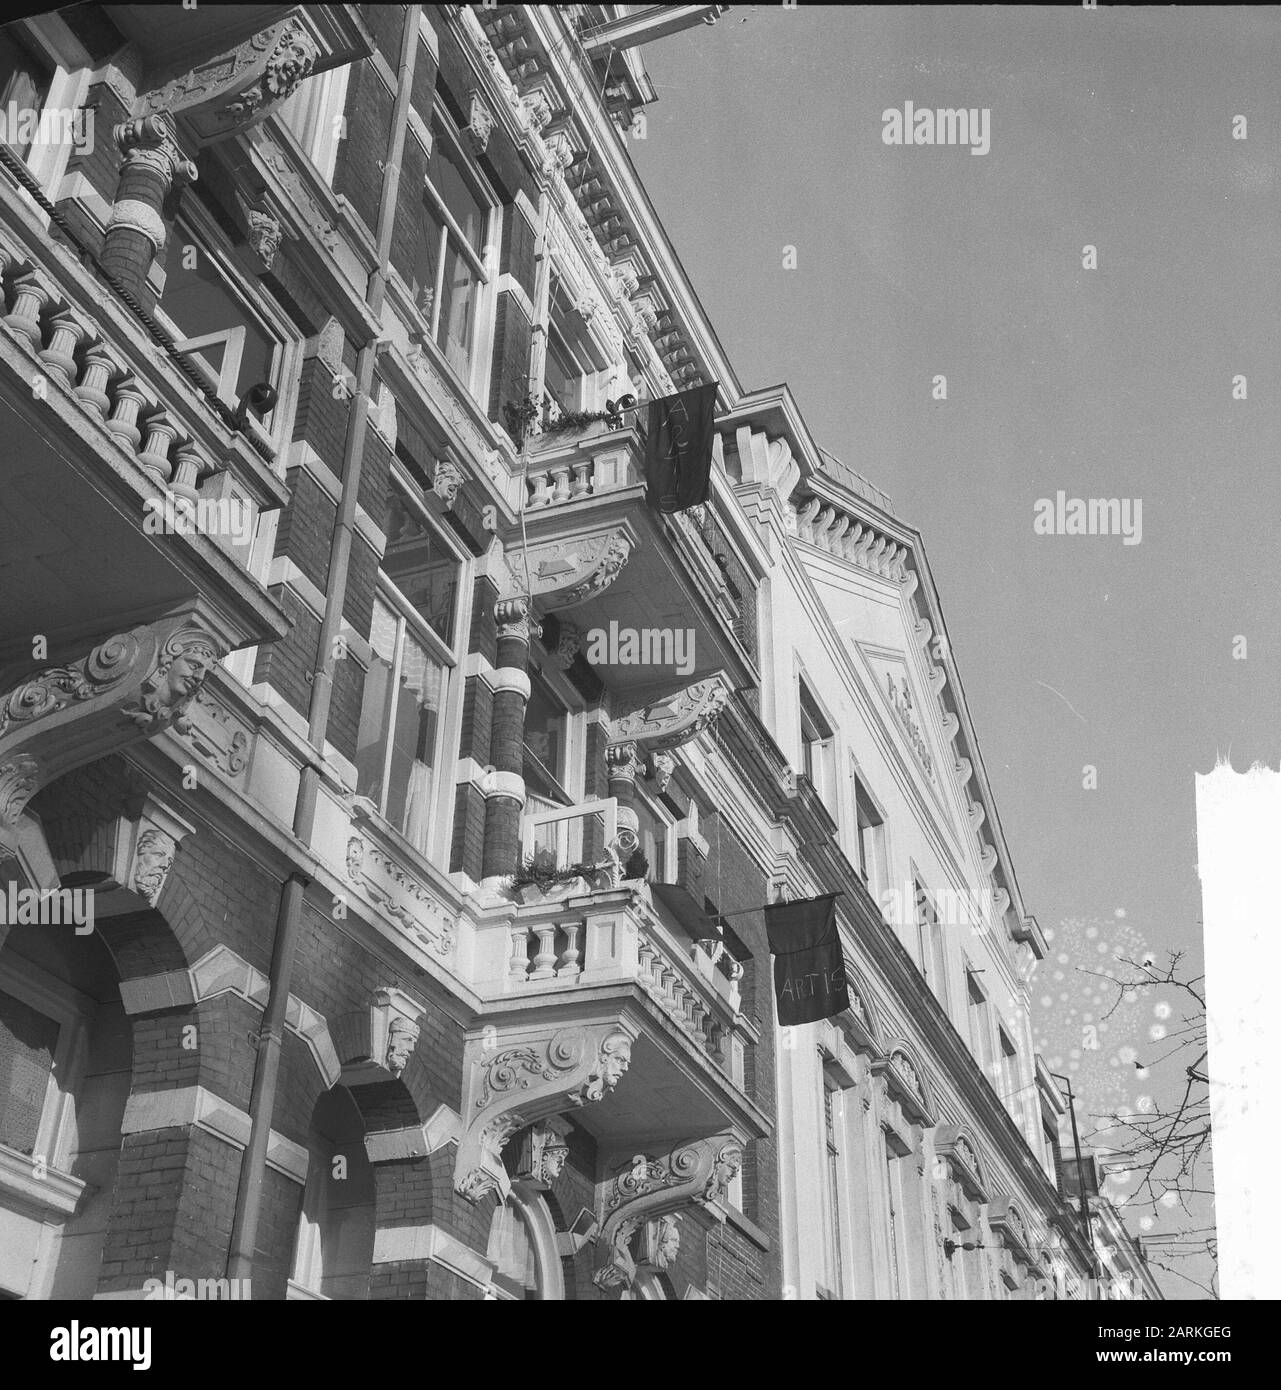 ongezond Plasticiteit schedel Black flag from the neighbours opposite zoo Artis in Amsterdam flags,  facades Date: 23 November 1965 Location: Amsterdam, Noord-Holland Keywords:  facades, flags Institution name: Artis Stock Photo - Alamy